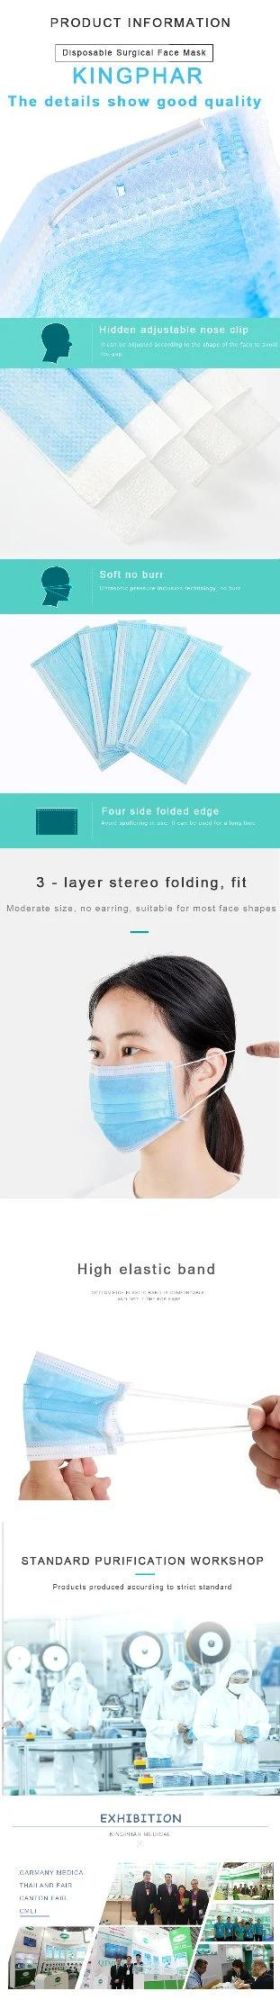 Disposable Medical Mask with Ce